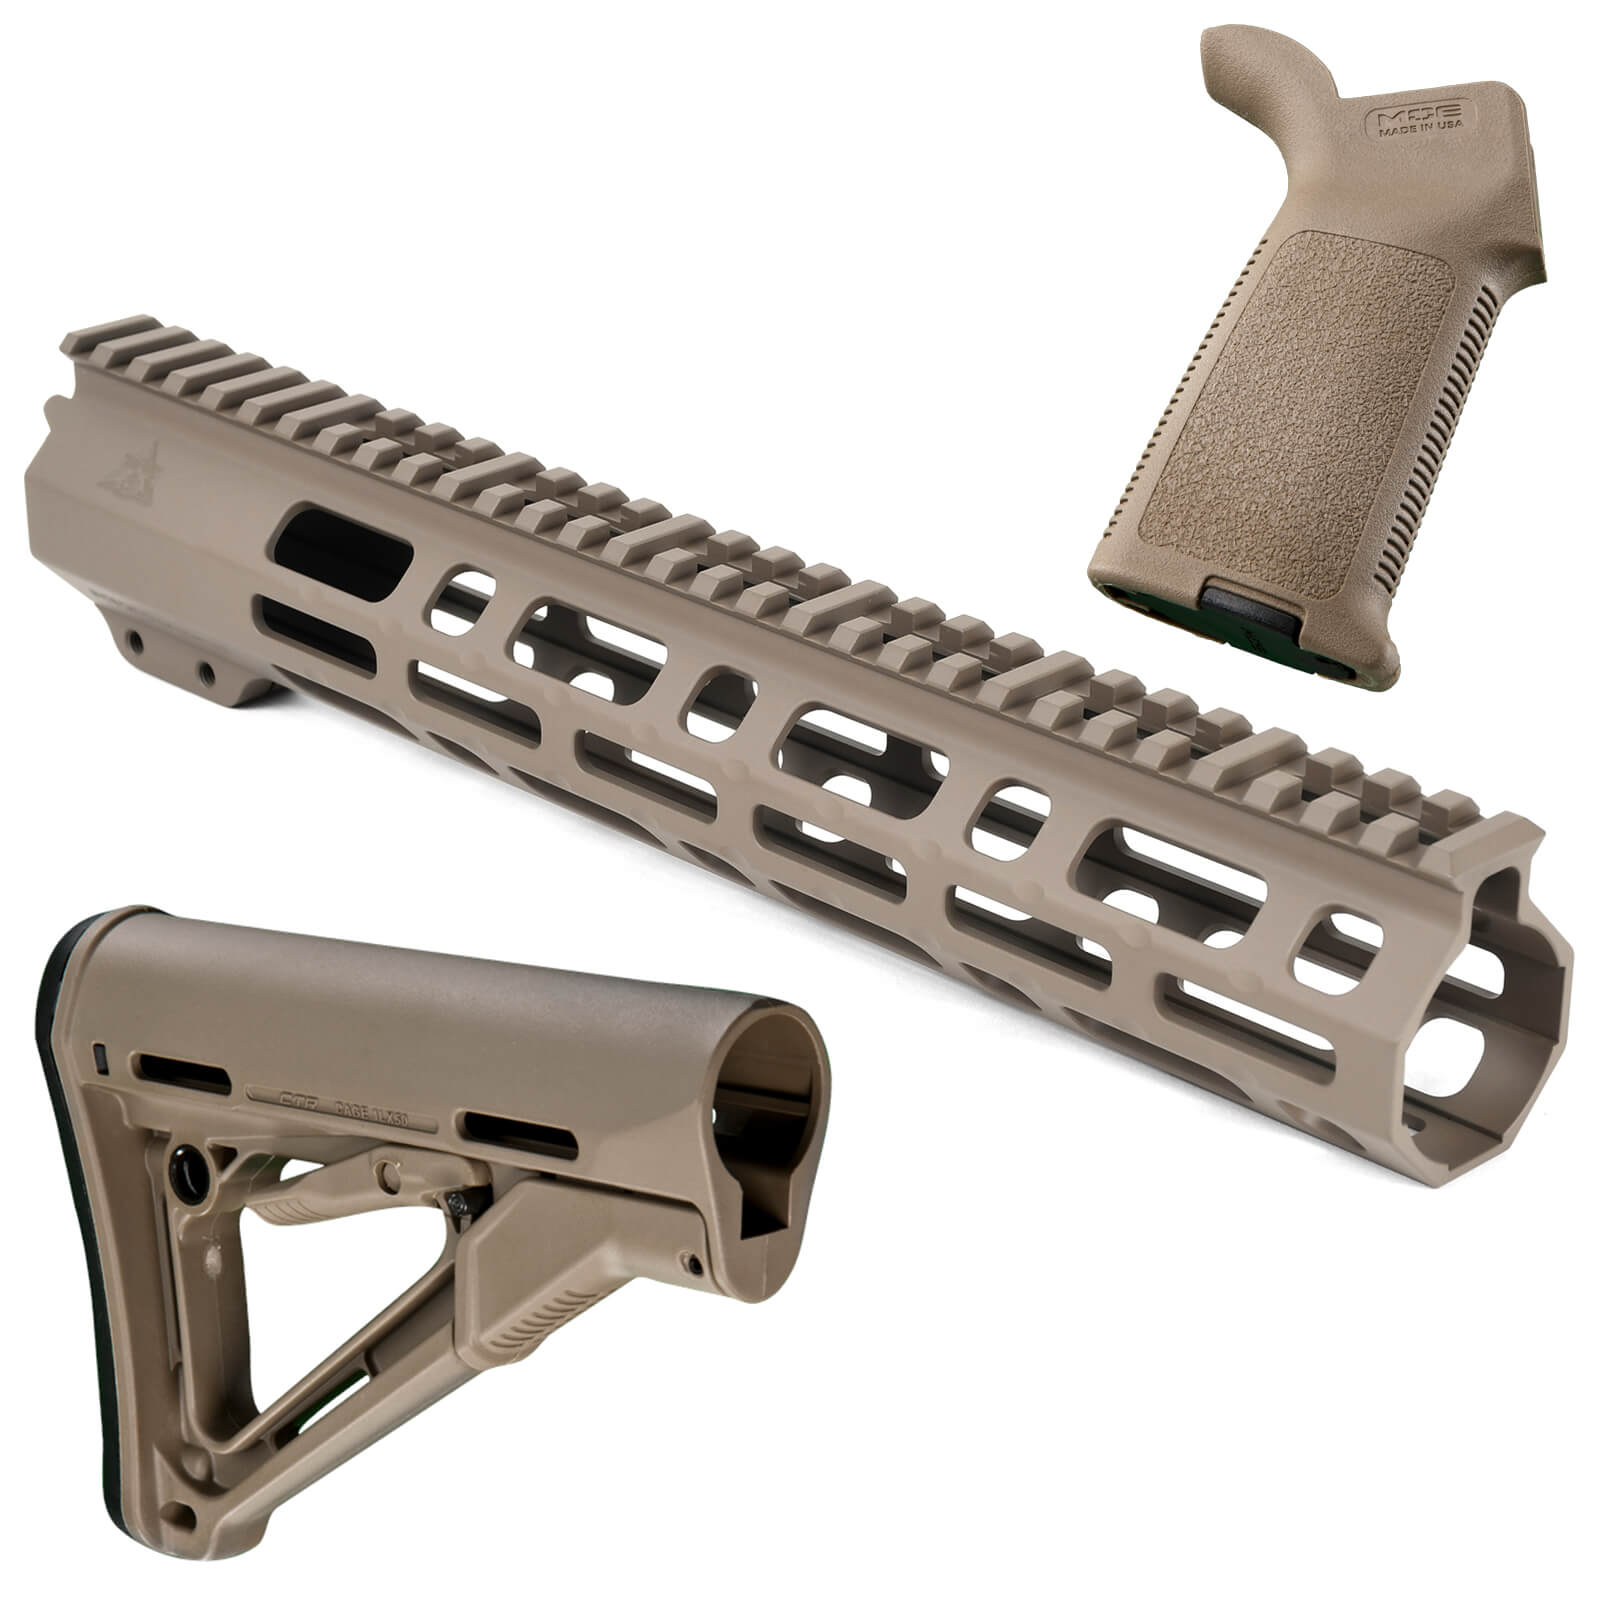 Enhance the look and feel of your AR-15 with our free-float handguard furni...